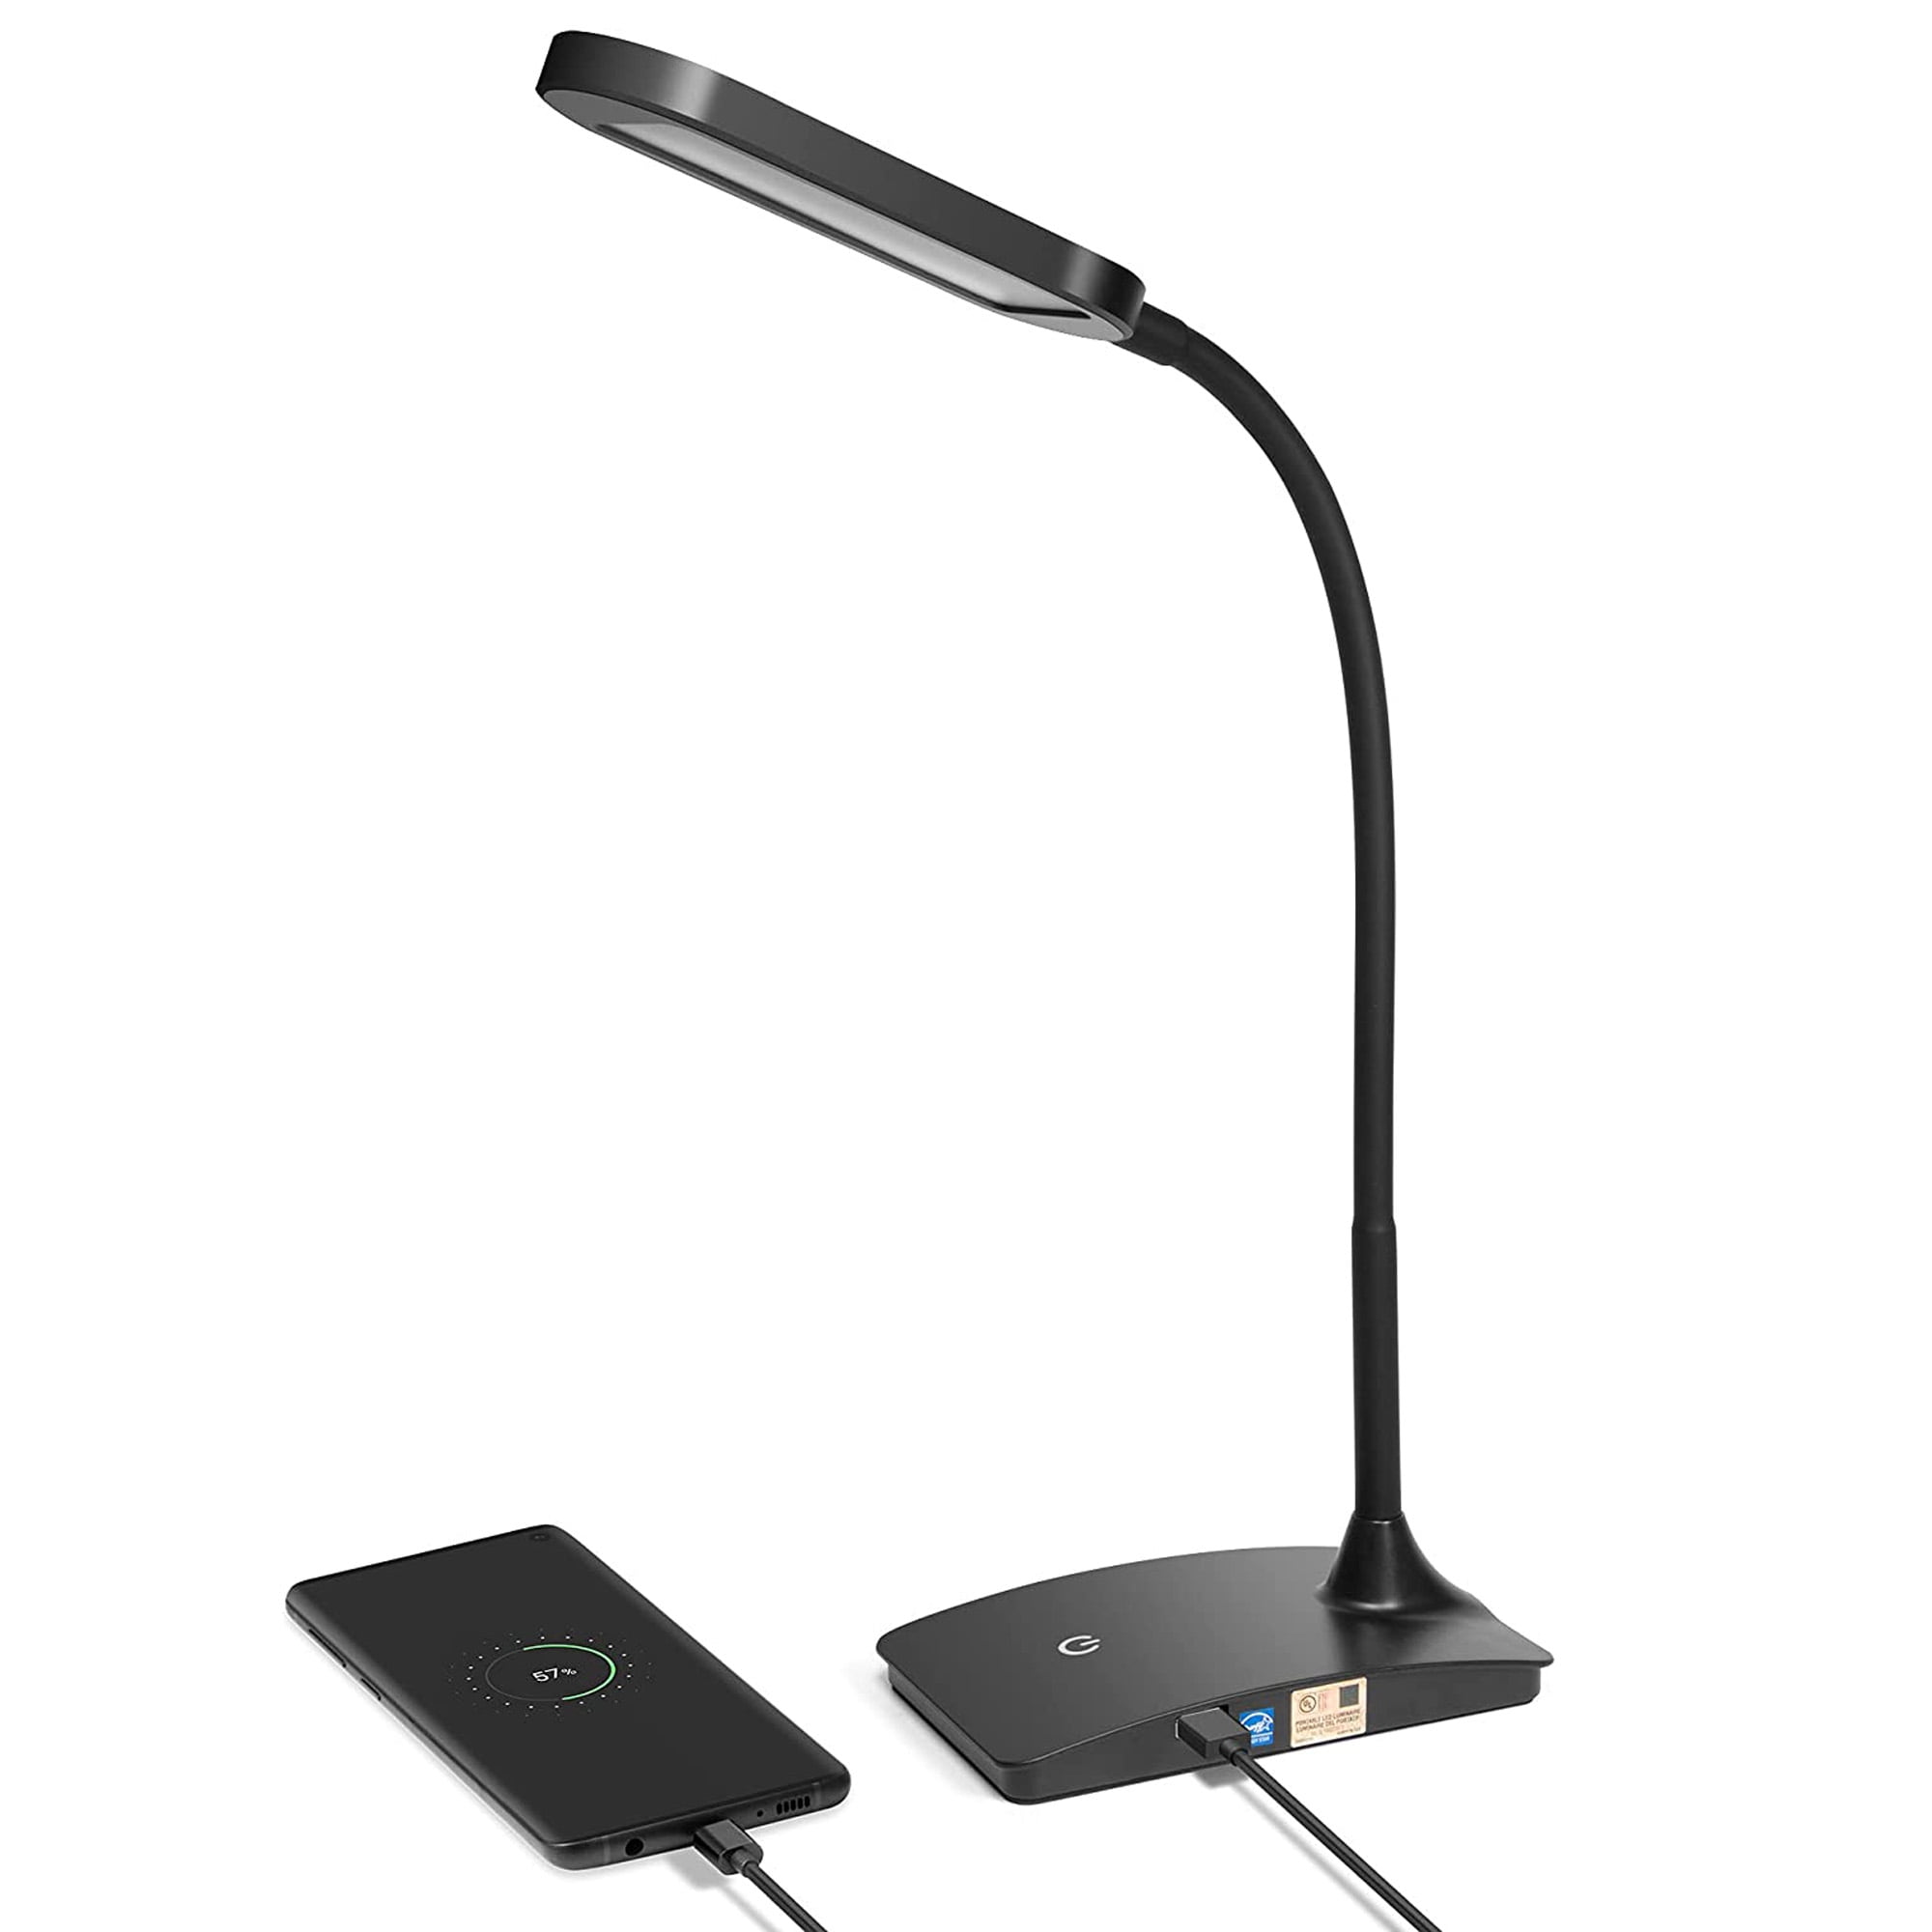 Tw Lighting Led Desk Lamp With Usb, Ledlux Smith Led Table Lamp With Usb Port In Black